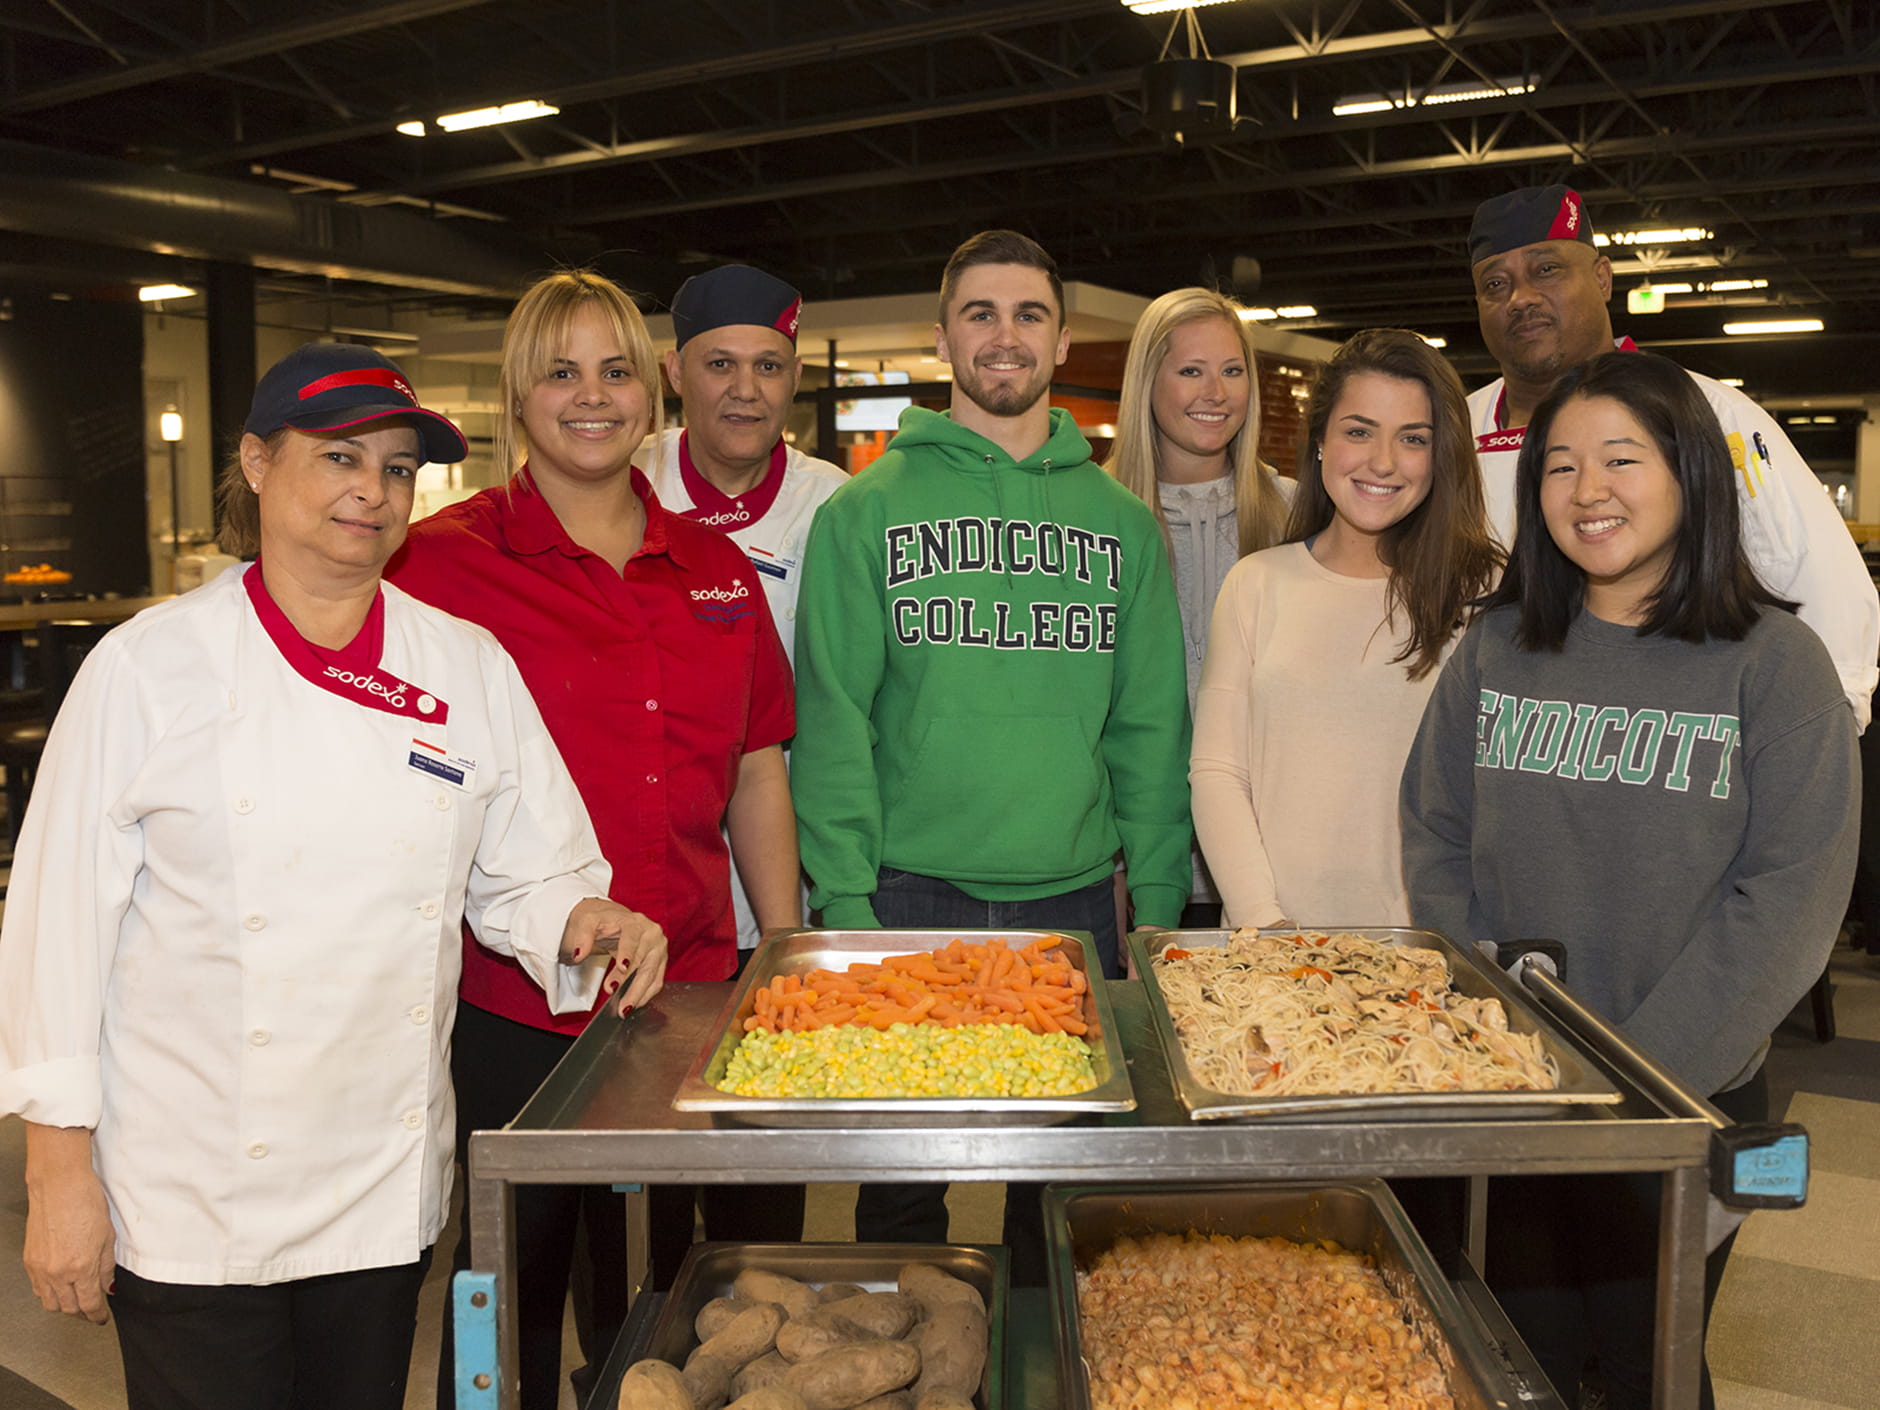 Endicott College and Sodexo give back to the community.